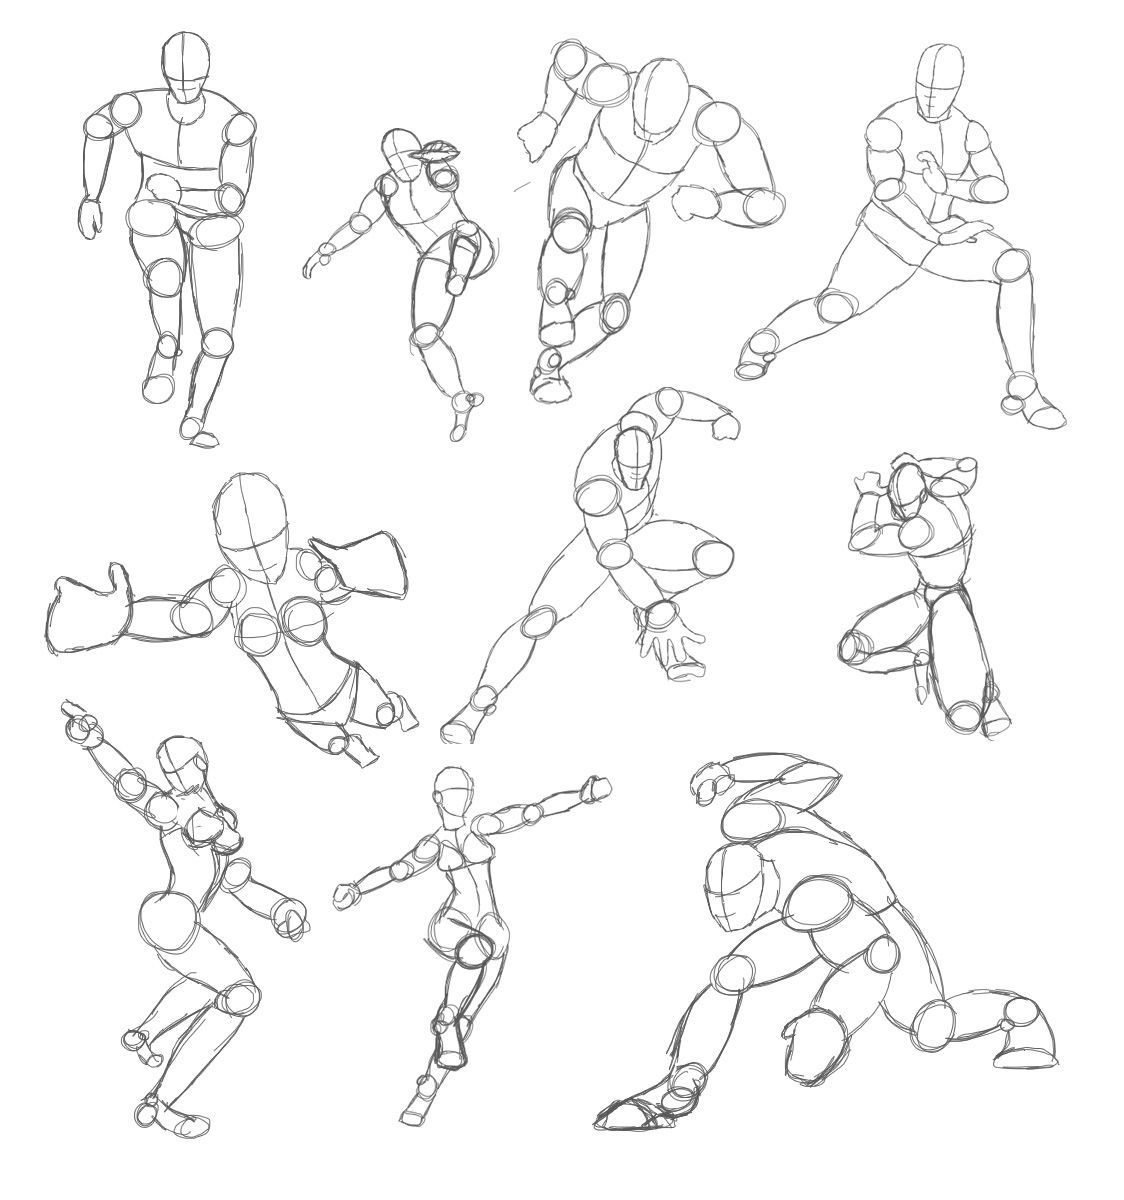 Drawing Dynamic Action Poses for Practice! - YouTube